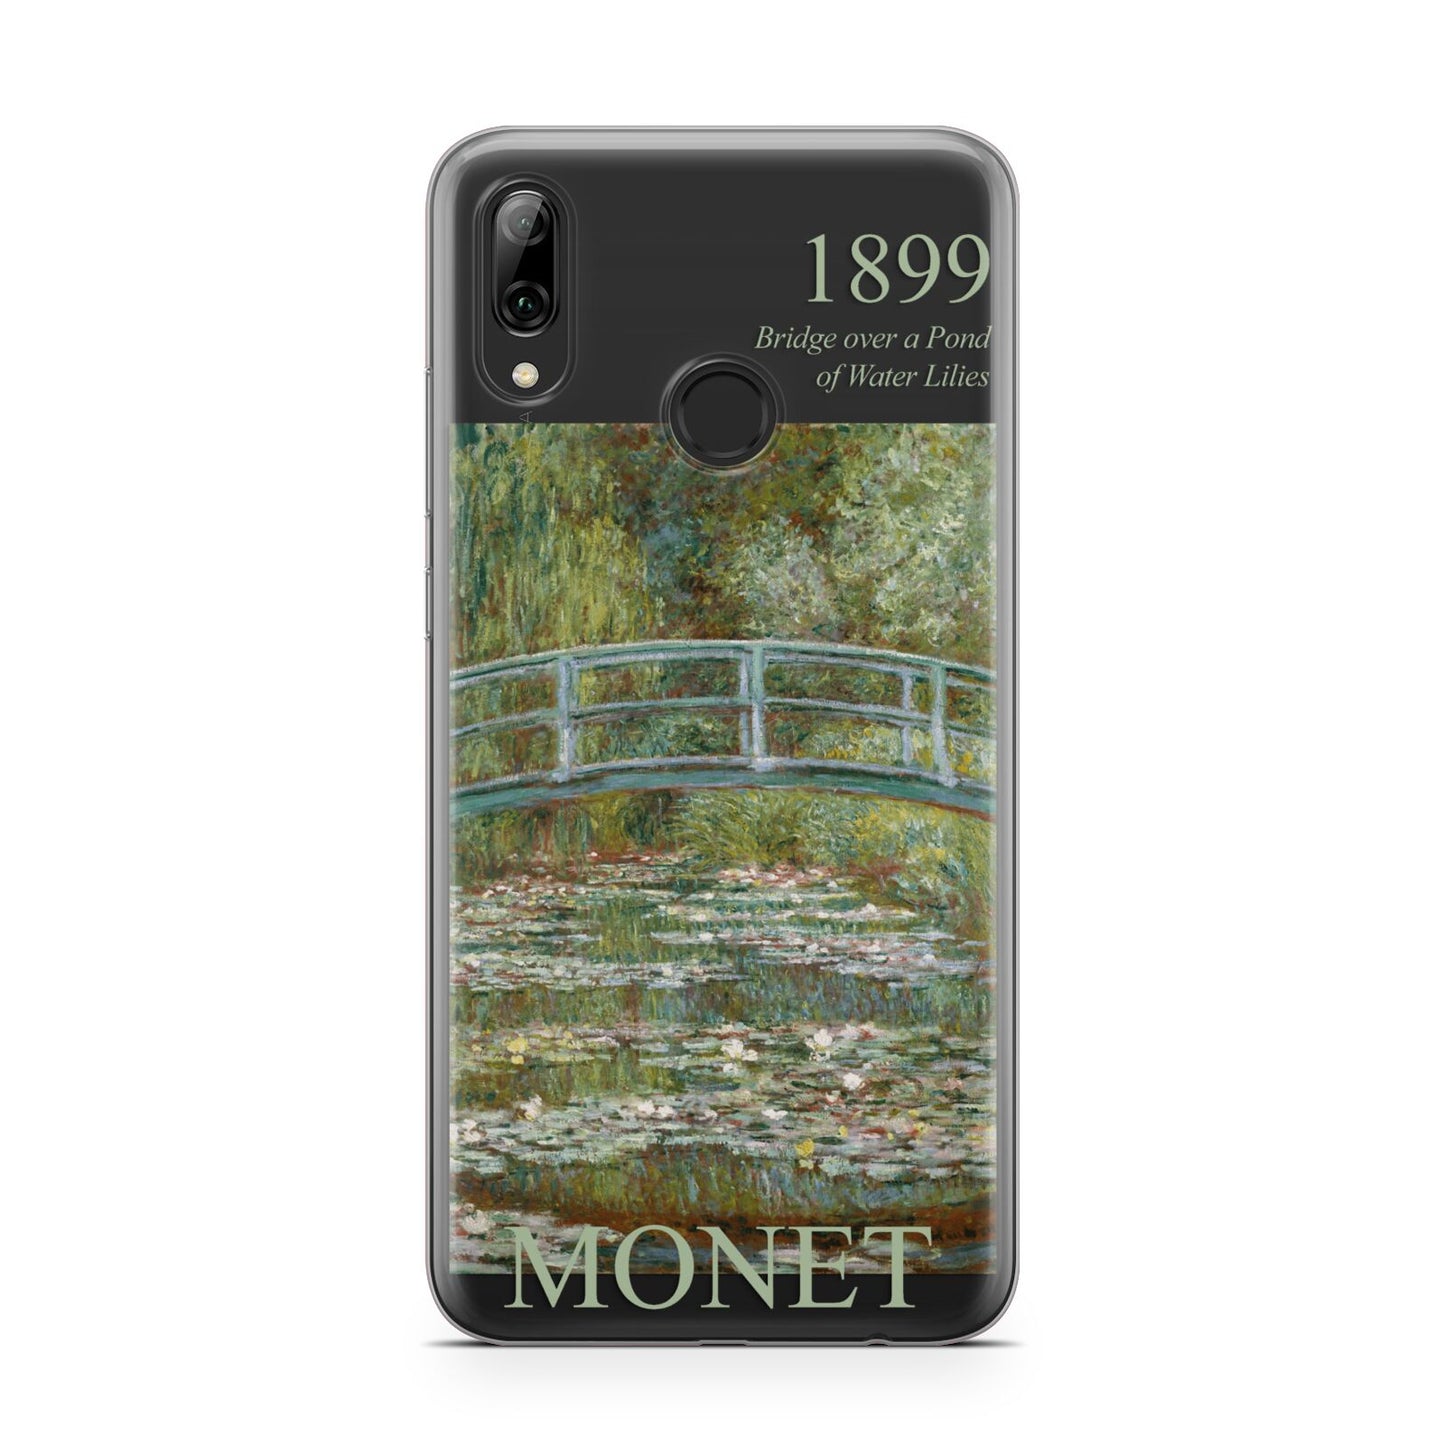 Bridge Over A Pond Of Water Lilies By Monet Huawei Y7 2019